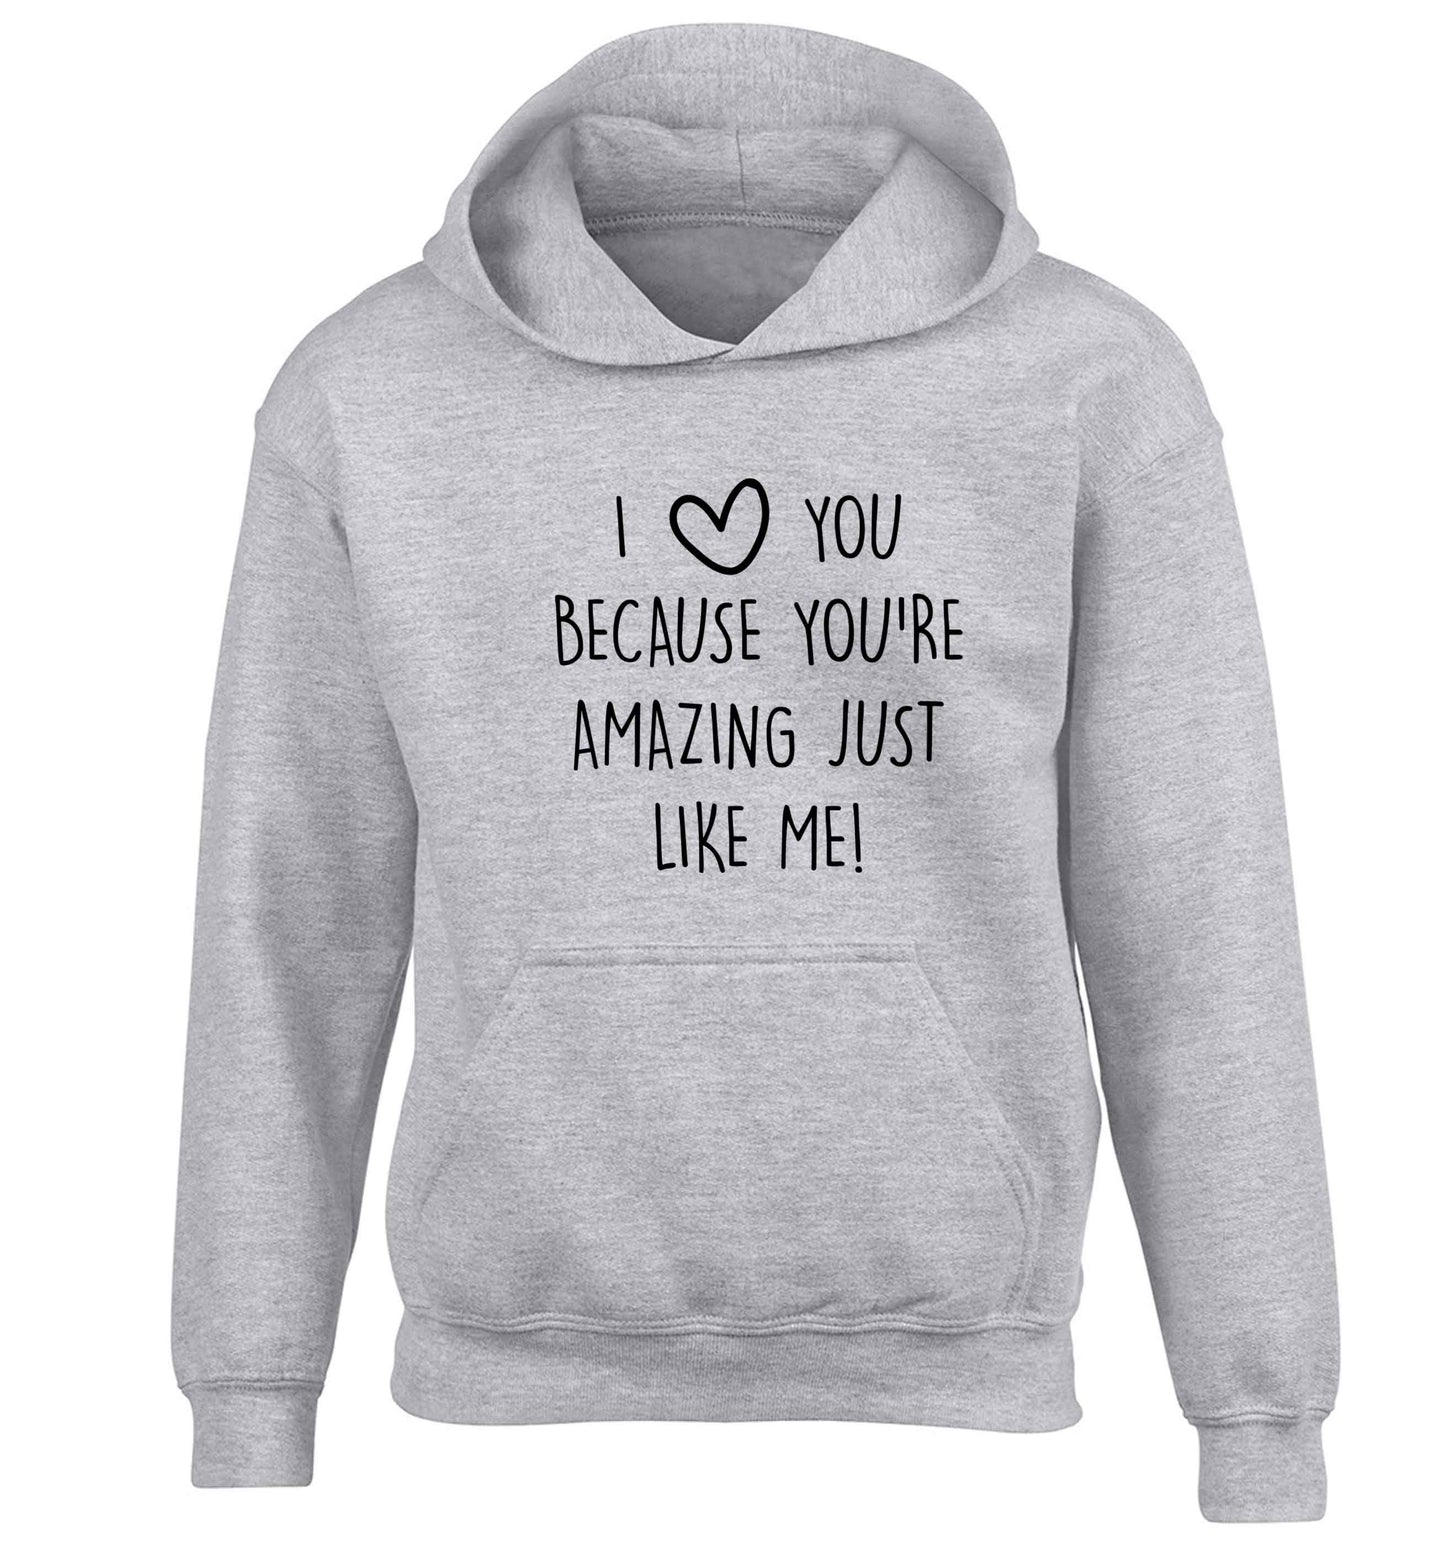 I love you because you're amazing just like me children's grey hoodie 12-13 Years